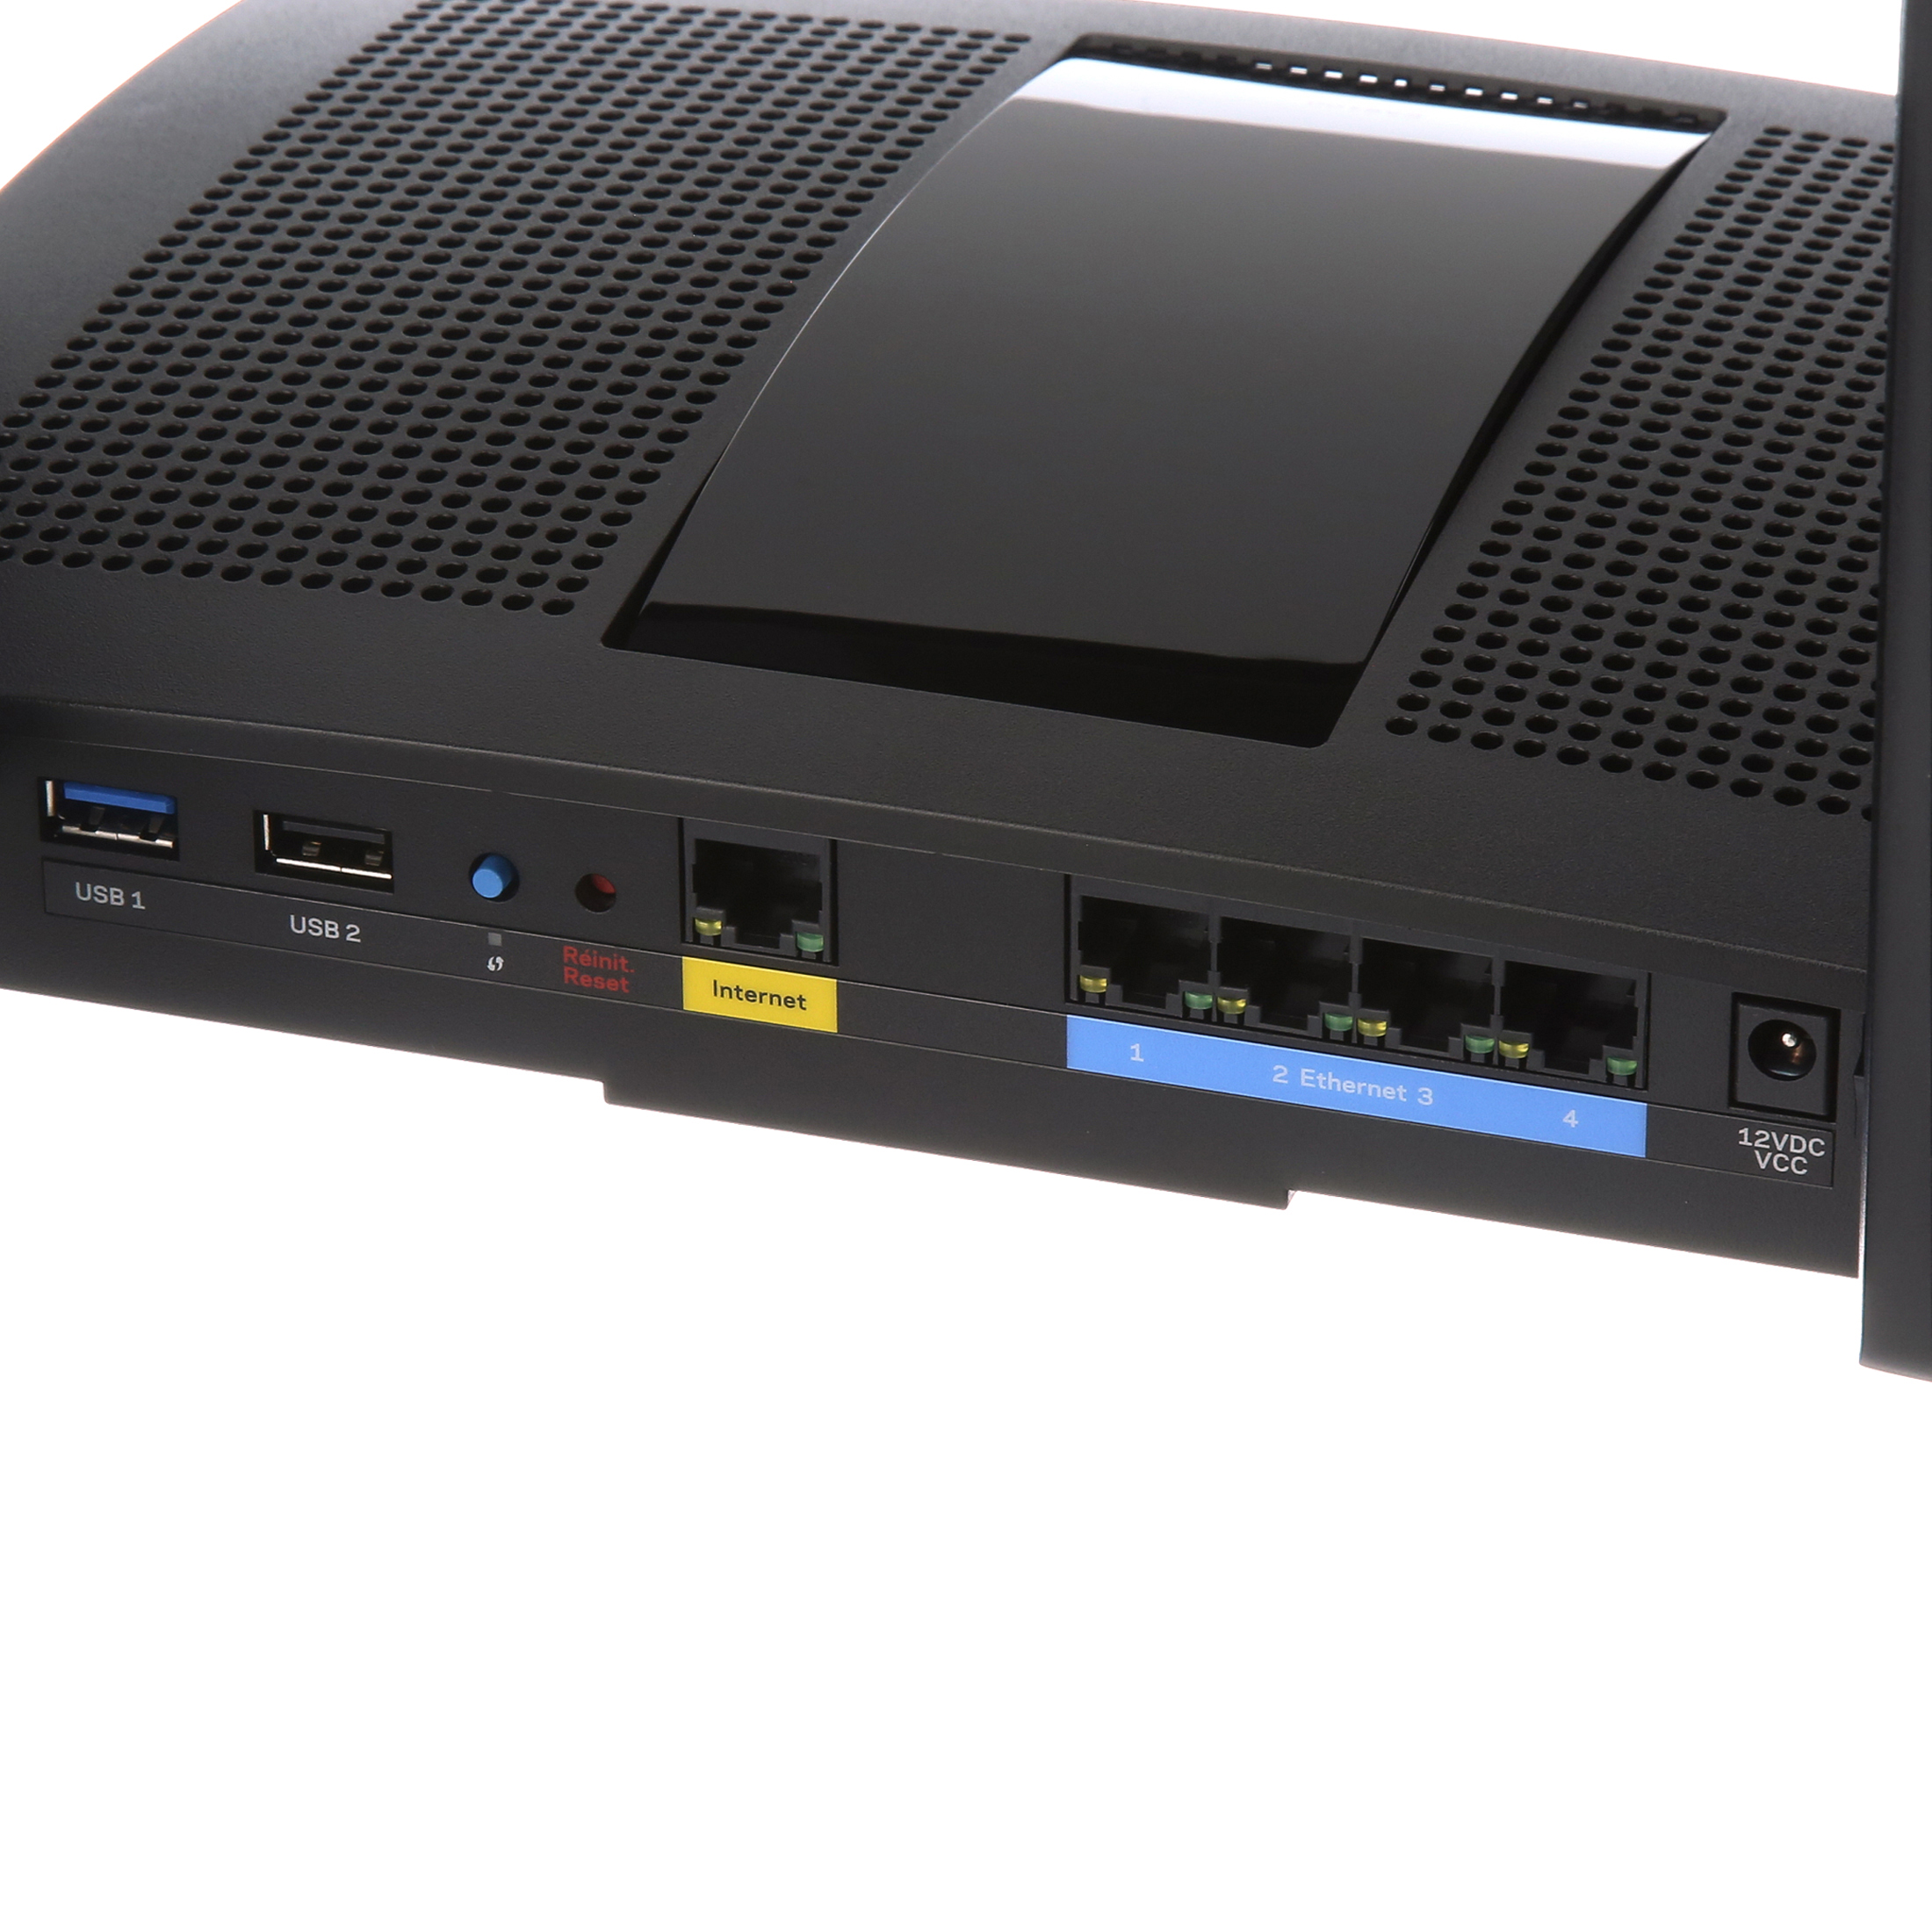 Linksys AC2600 4x4 MU-MIMO Dual-Band Gigabit Router with USB 3.0 and eSATA (EA8100) - image 3 of 9